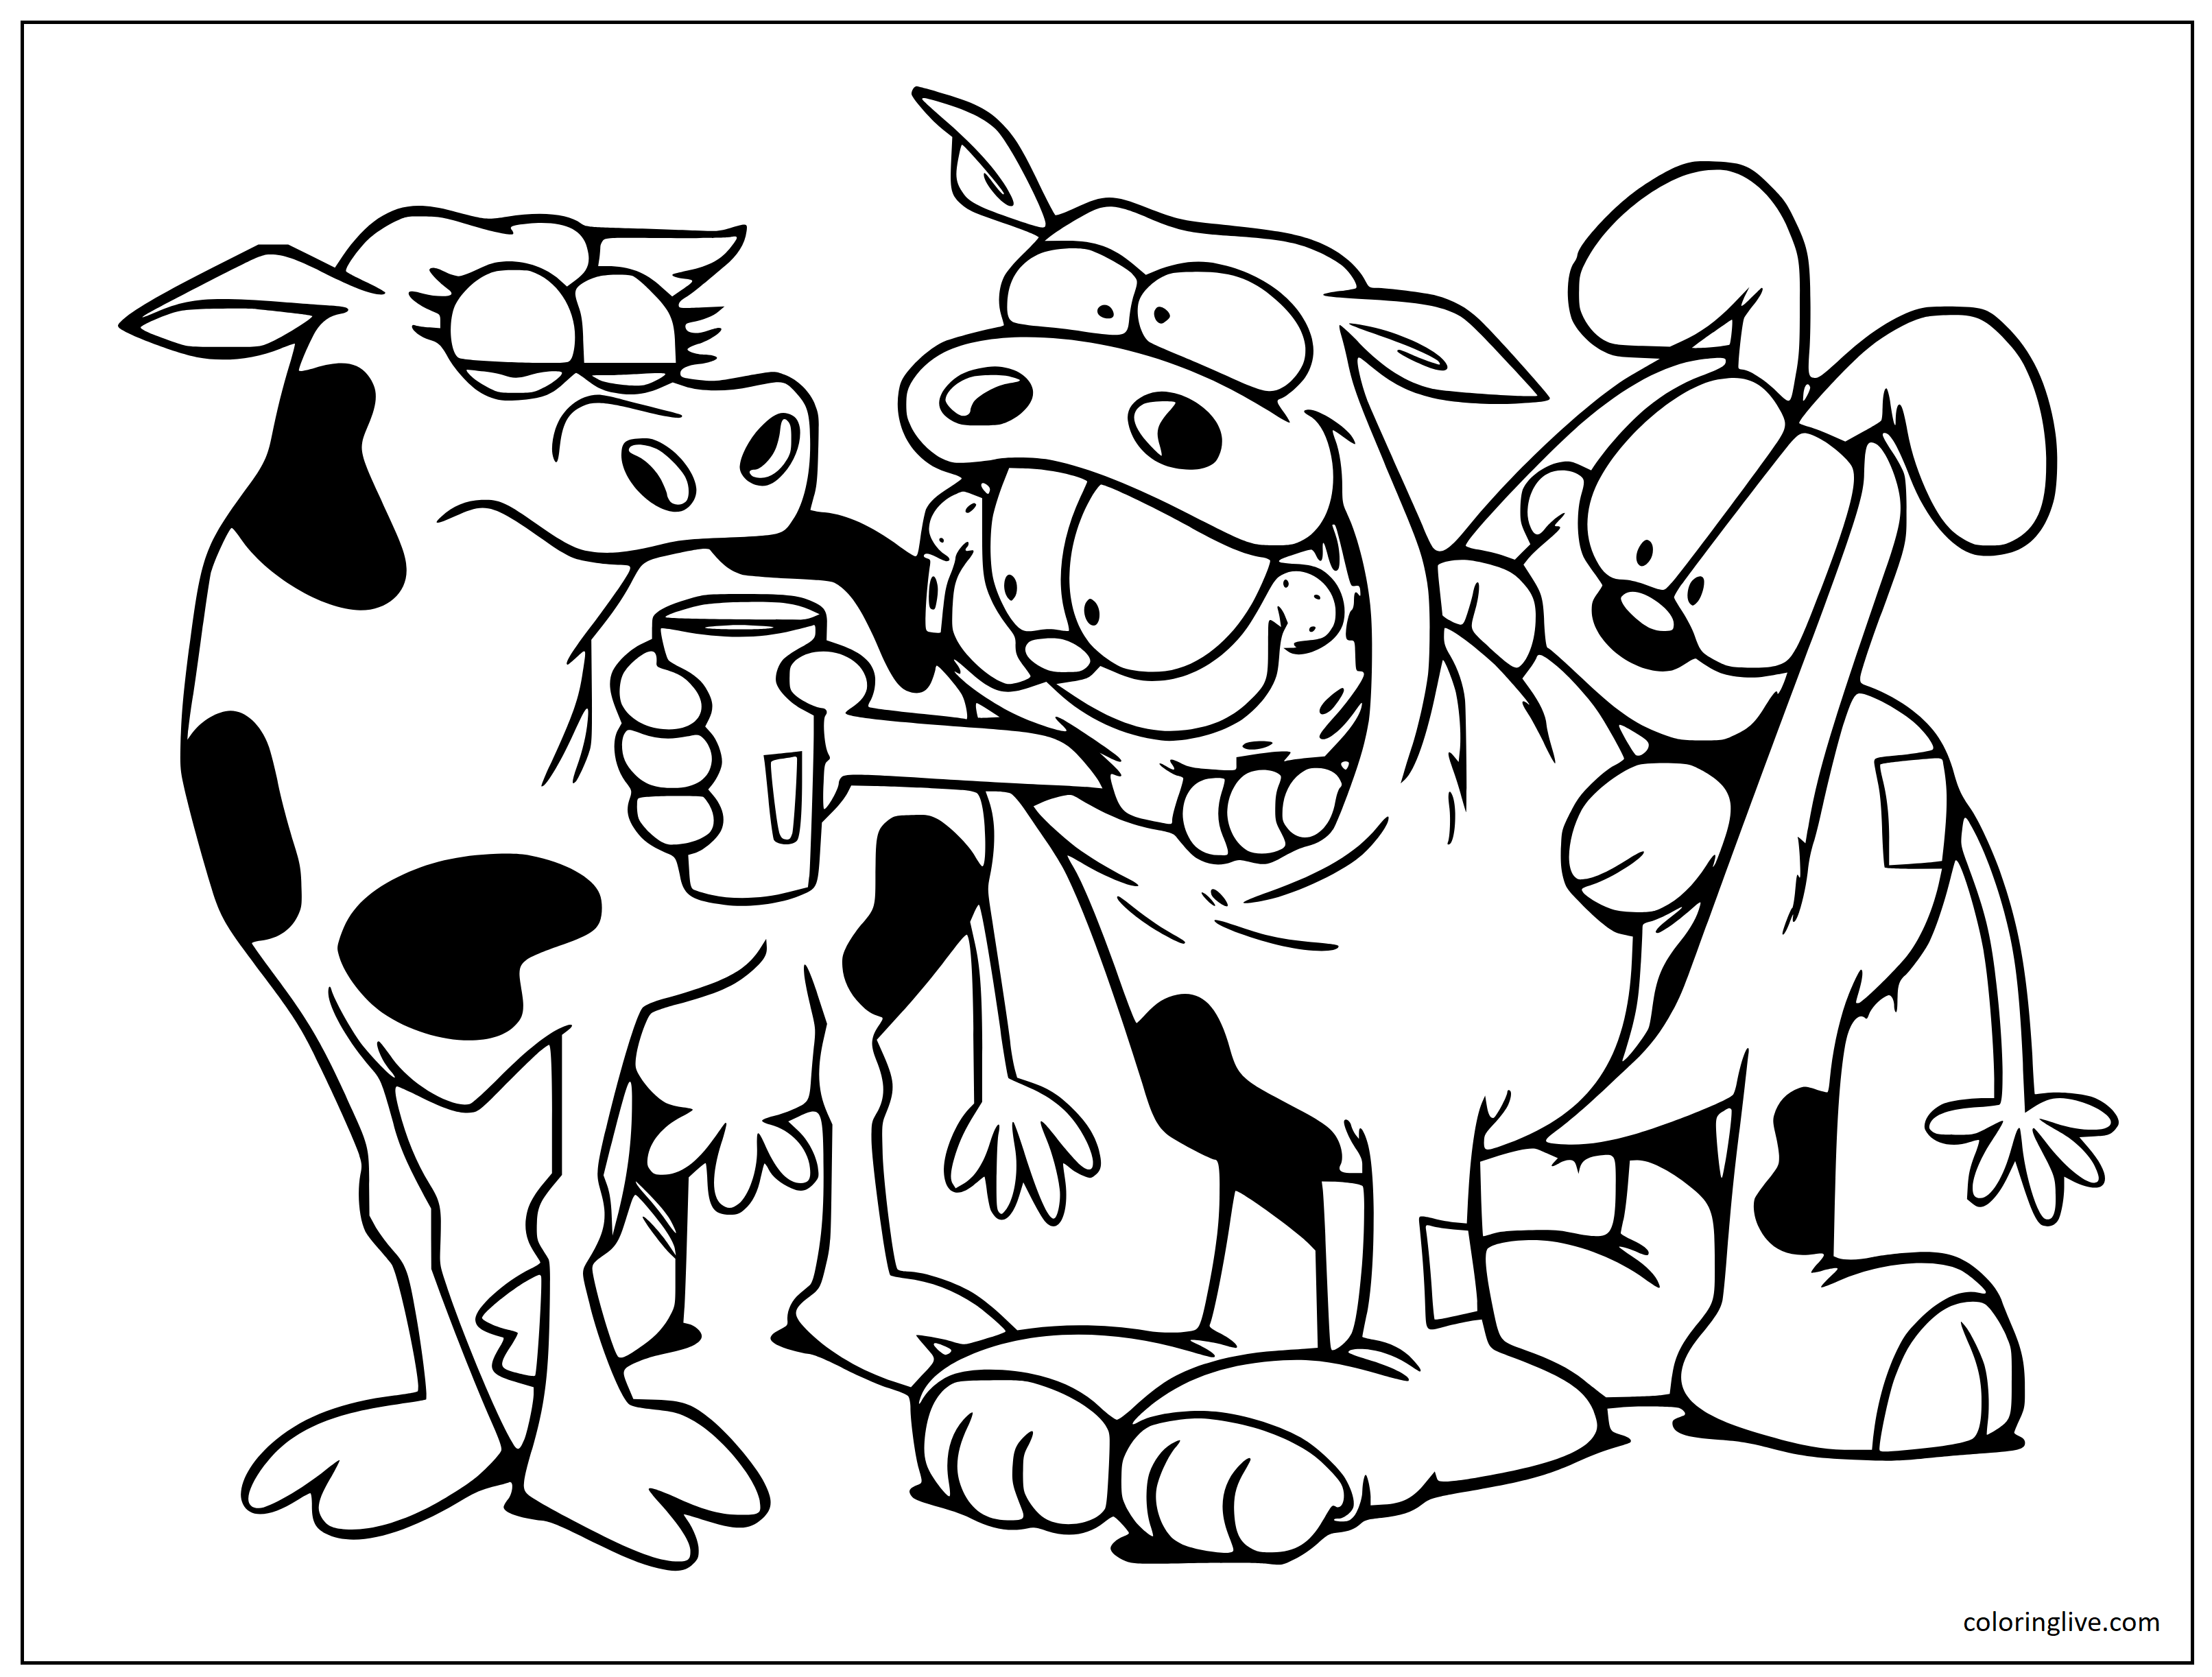 Printable Garfield Odie and Cows Coloring Page for kids.